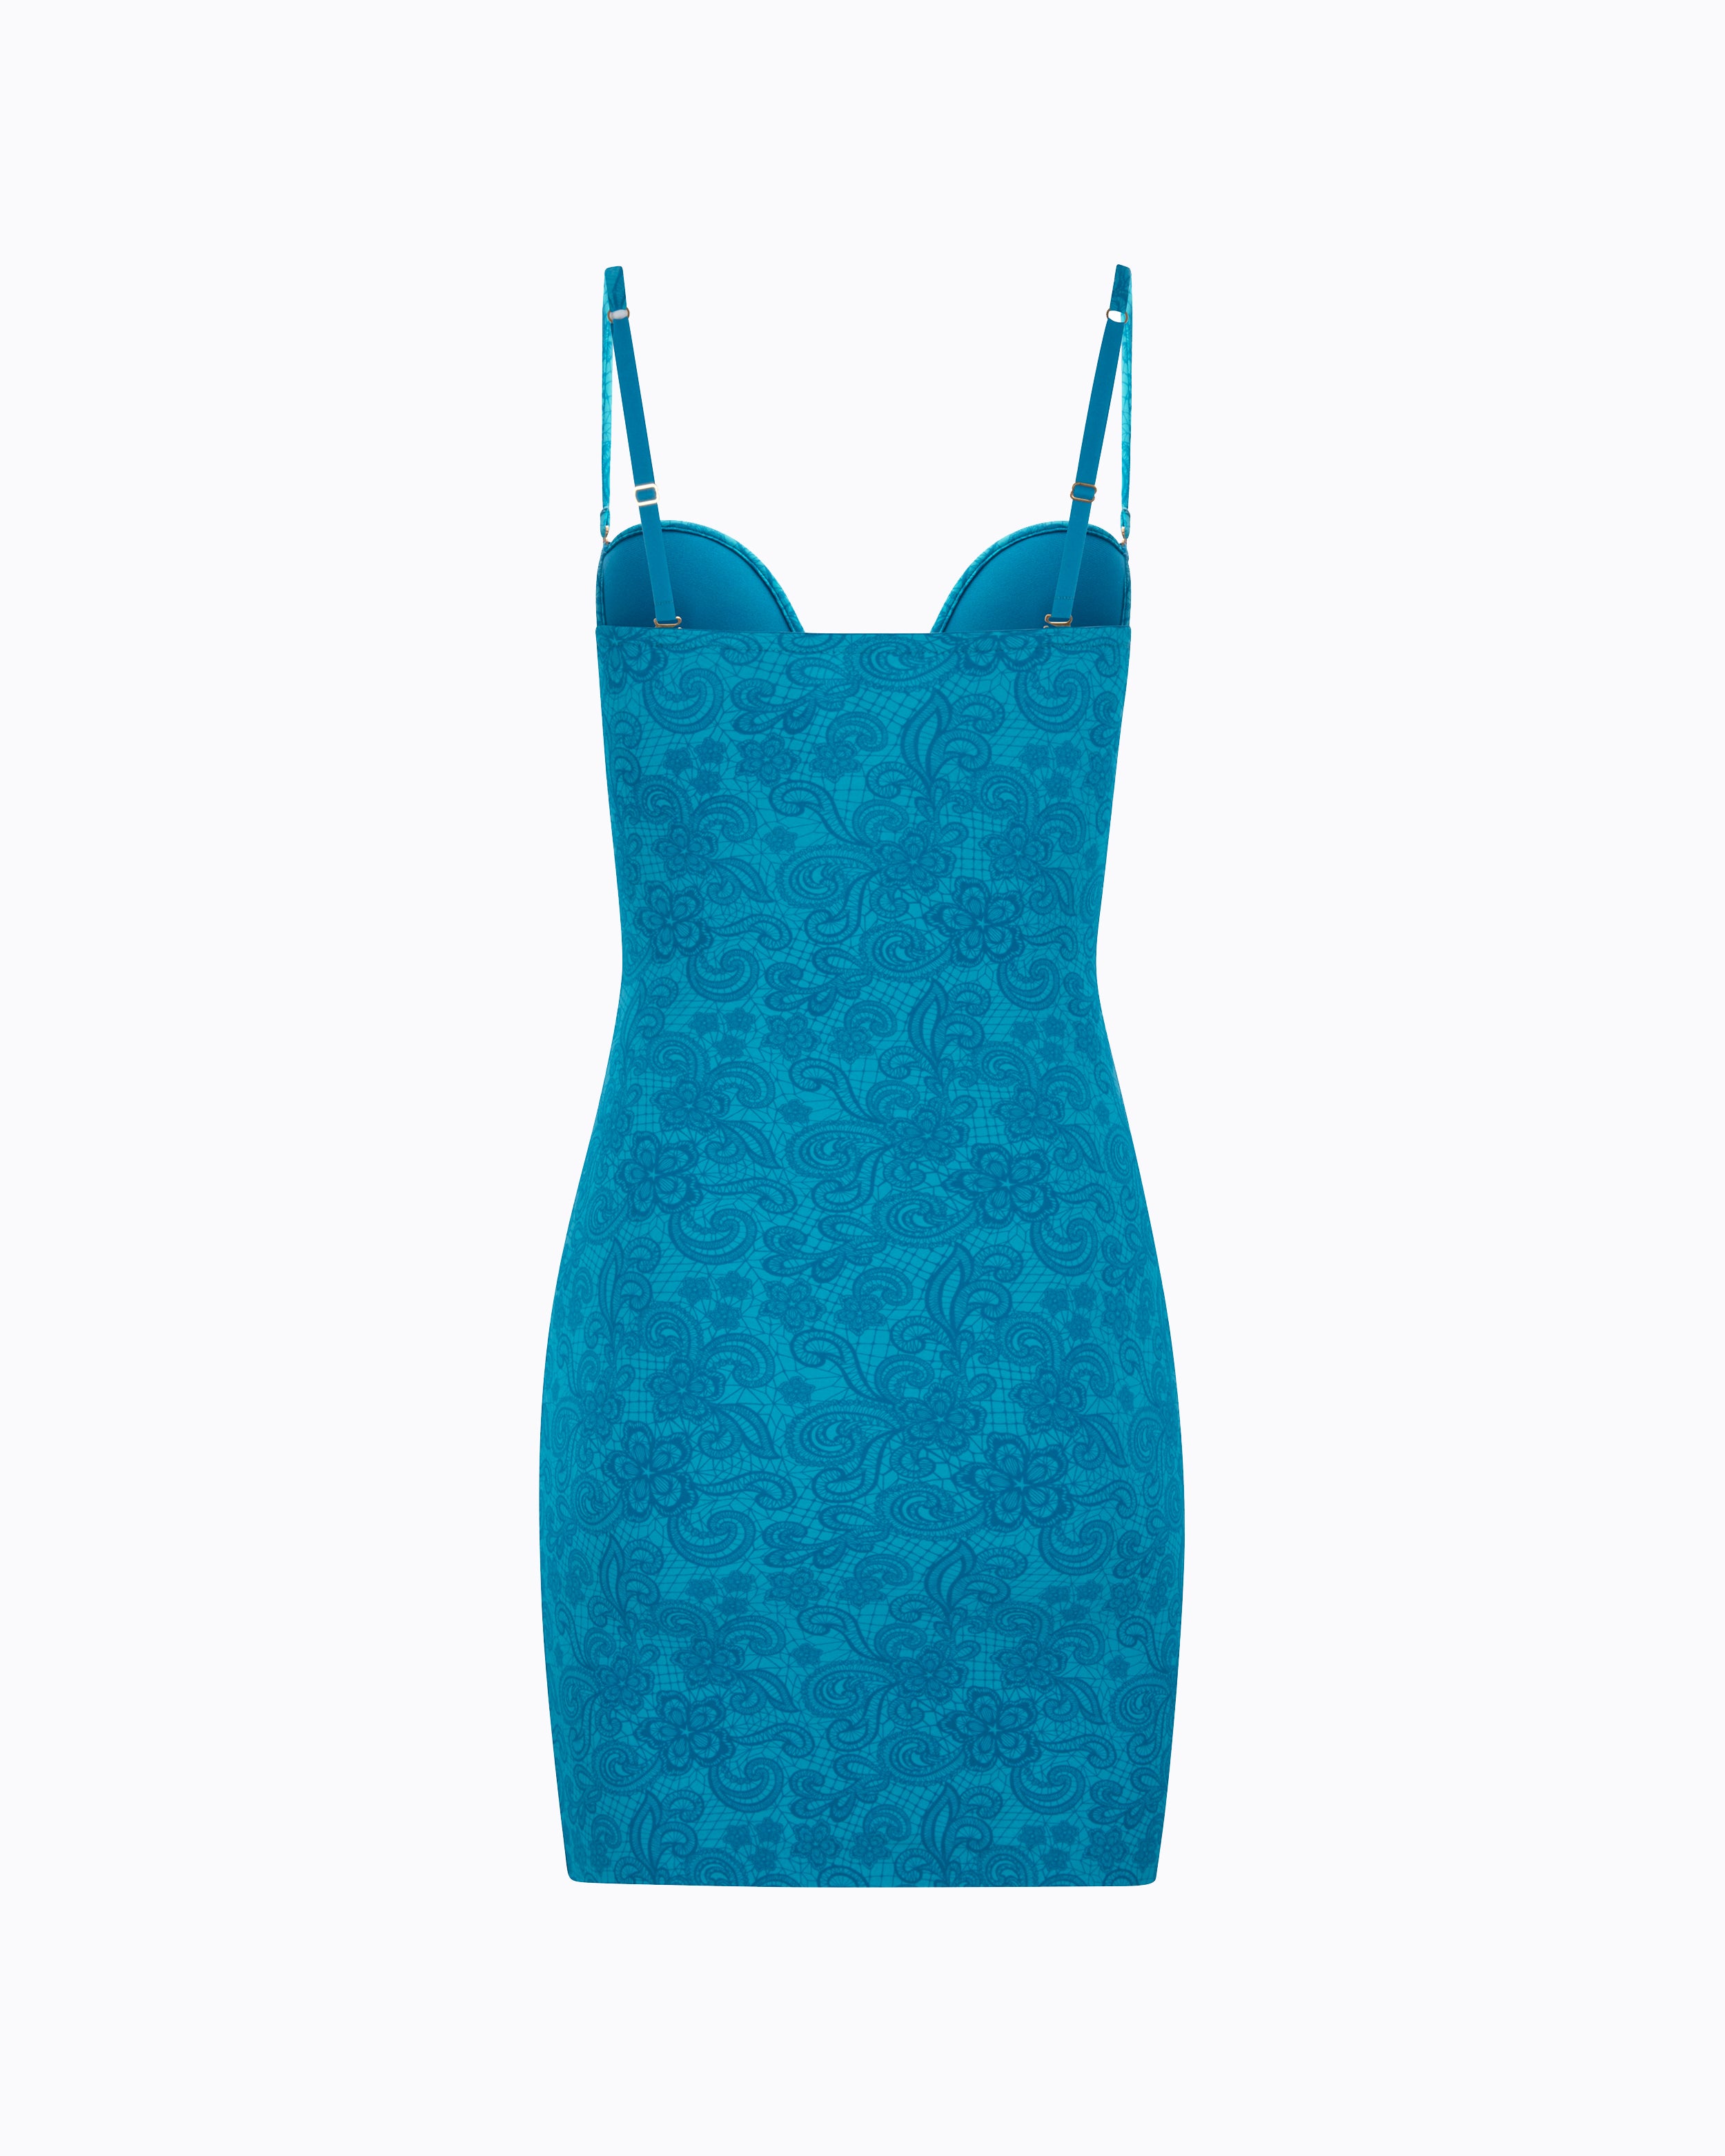 Smooth Operator Dress in Blue